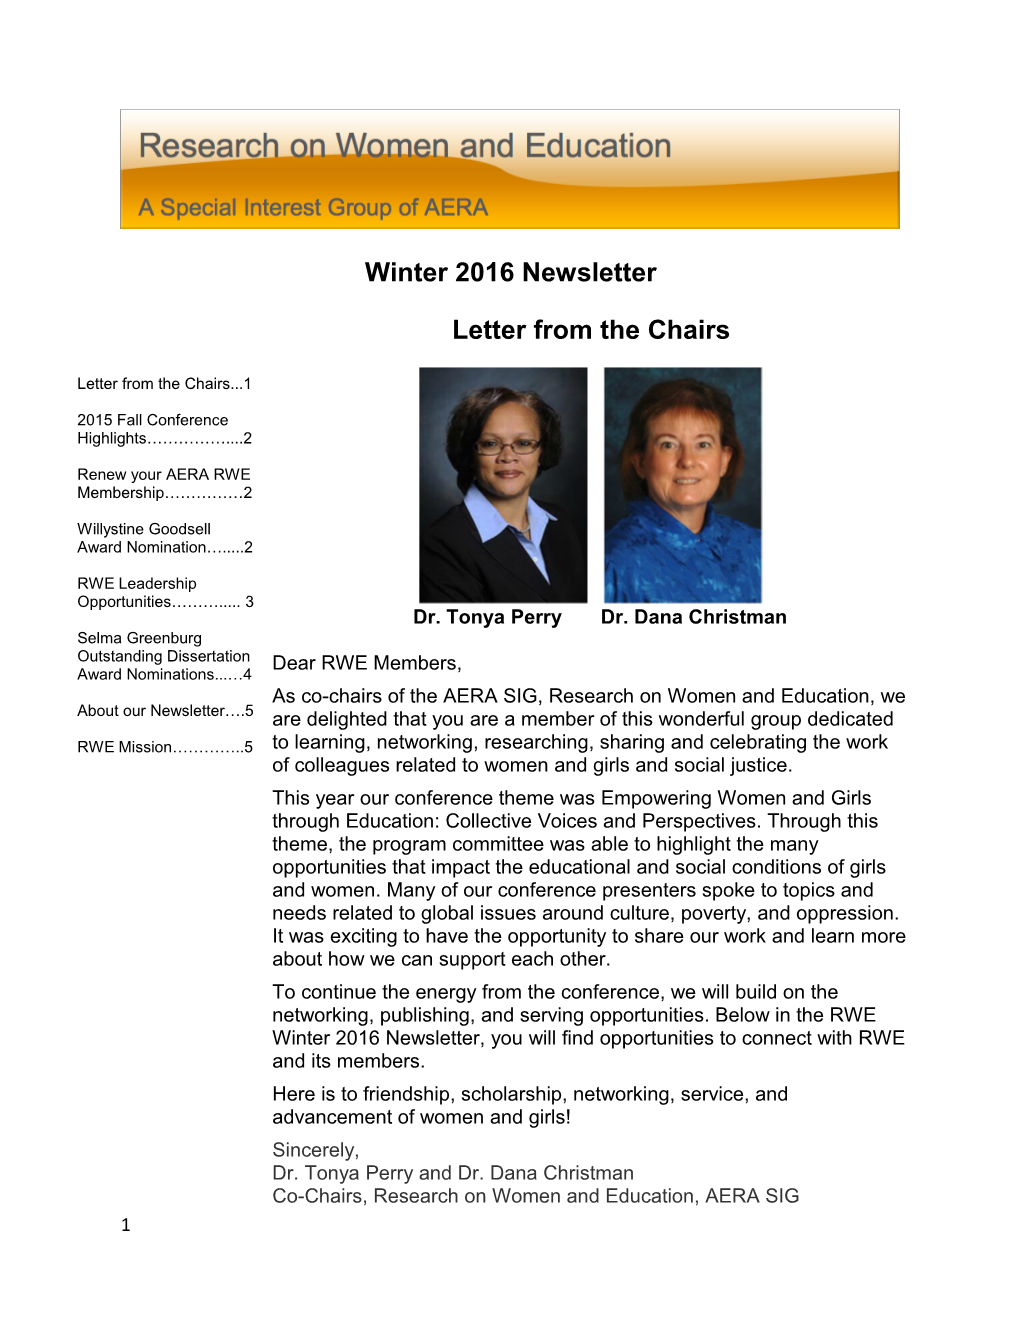 2015 Annual Fall Conference Highlights